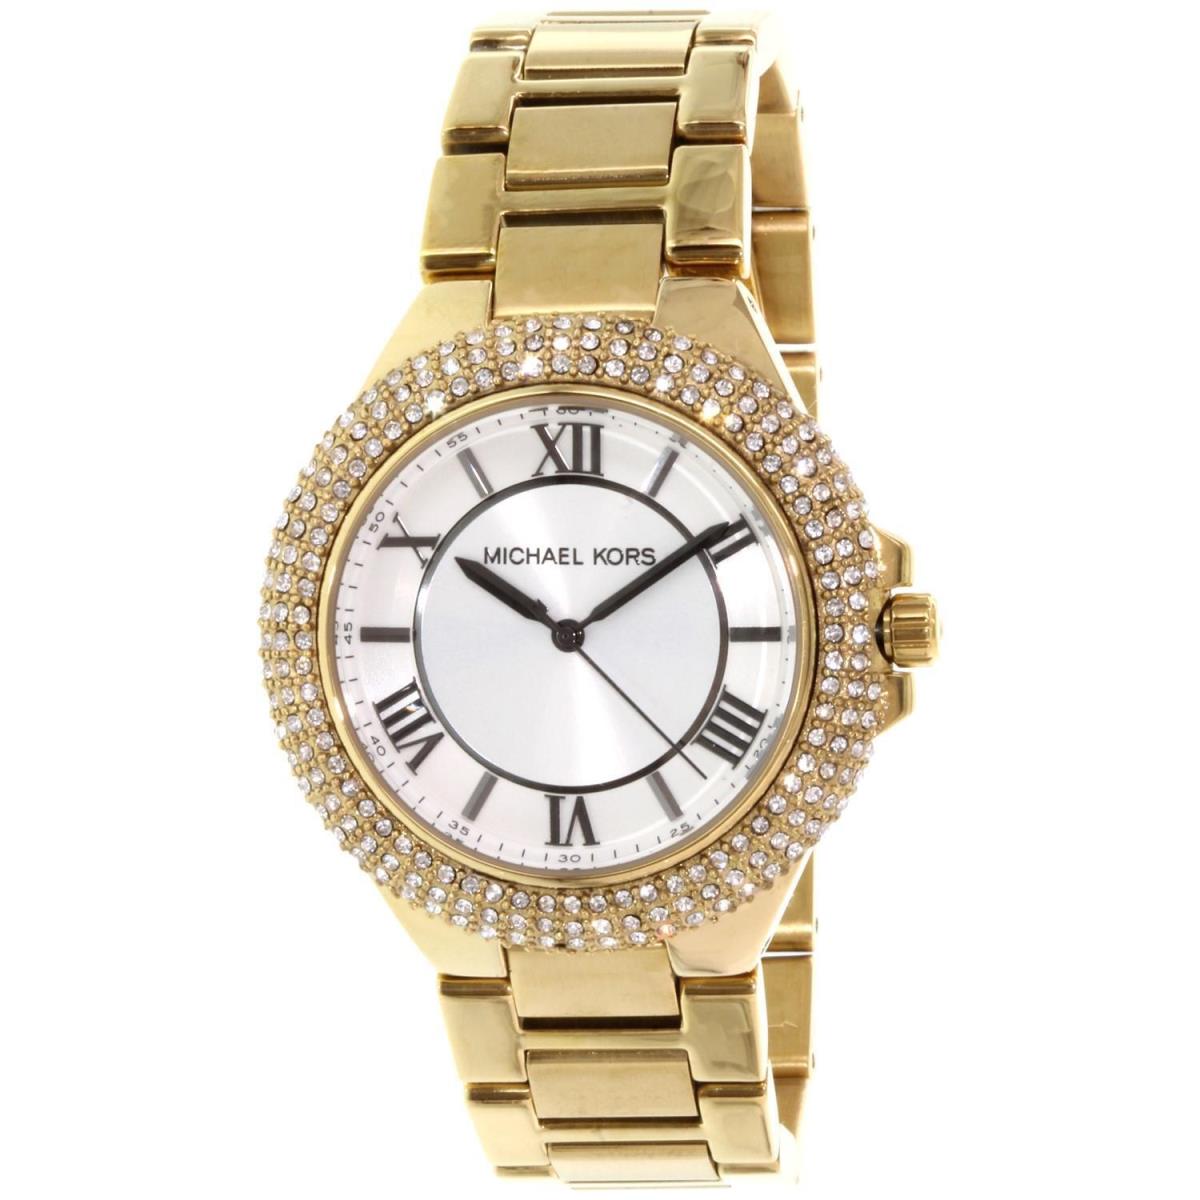 Michael Kors Camille Gold Tone Pave Glitz Roman Crystals WATCH-MK3277 - Dial: White, Band: Yellow Gold